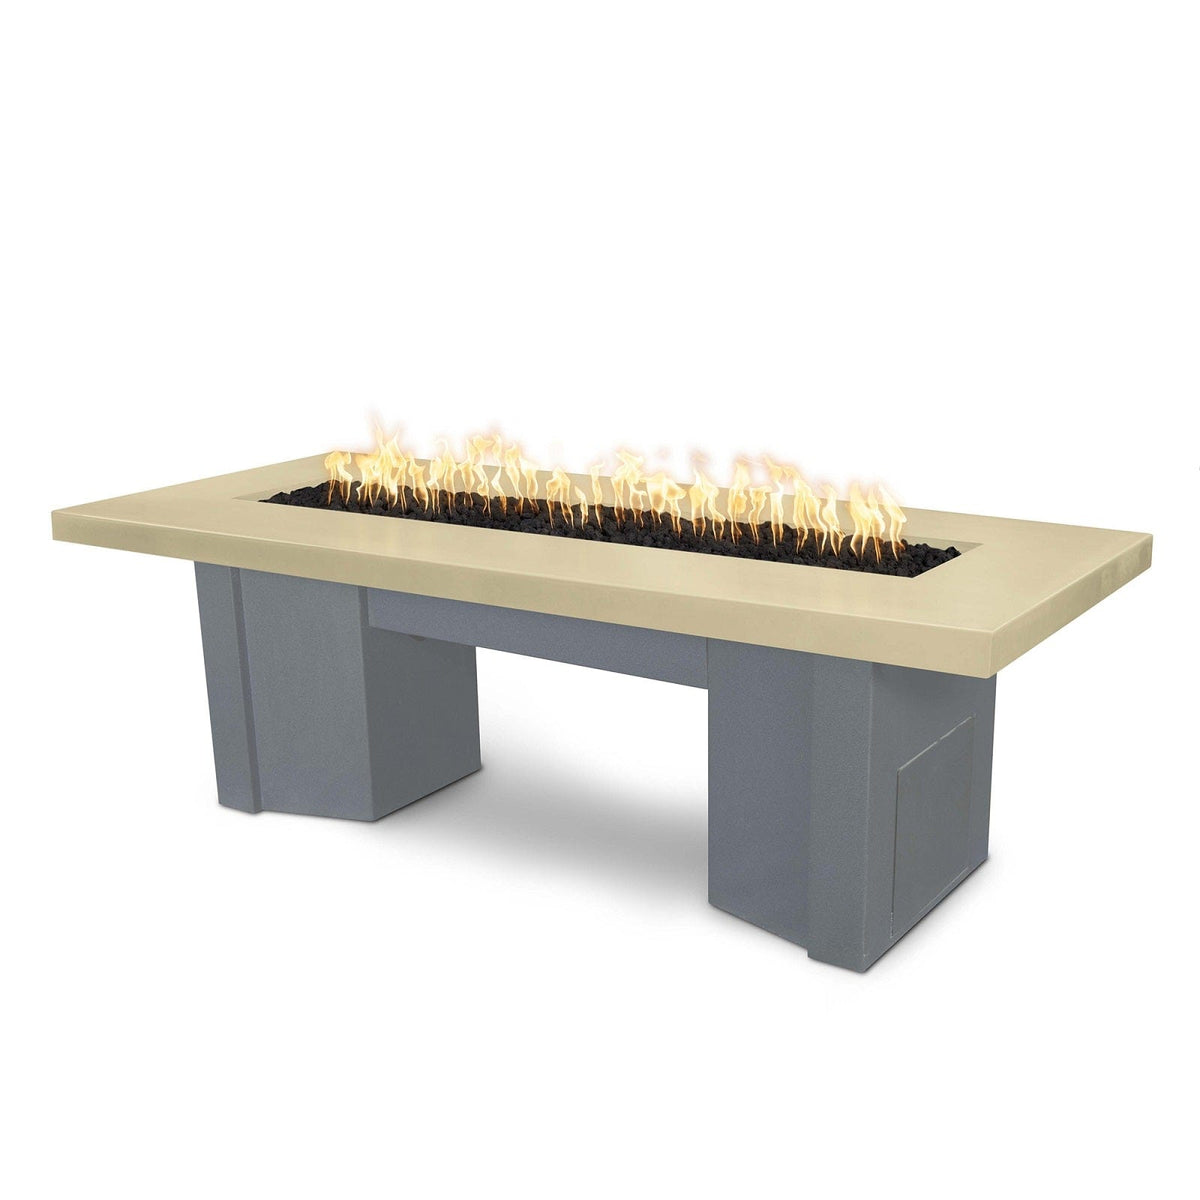 The Outdoor Plus Fire Features Vanilla (-VAN) / Gray Powder Coated Steel (-GRY) The Outdoor Plus 60&quot; Alameda Fire Table Smooth Concrete in Liquid Propane - Match Lit with Flame Sense System / OPT-ALMGFRC60FSML-LP